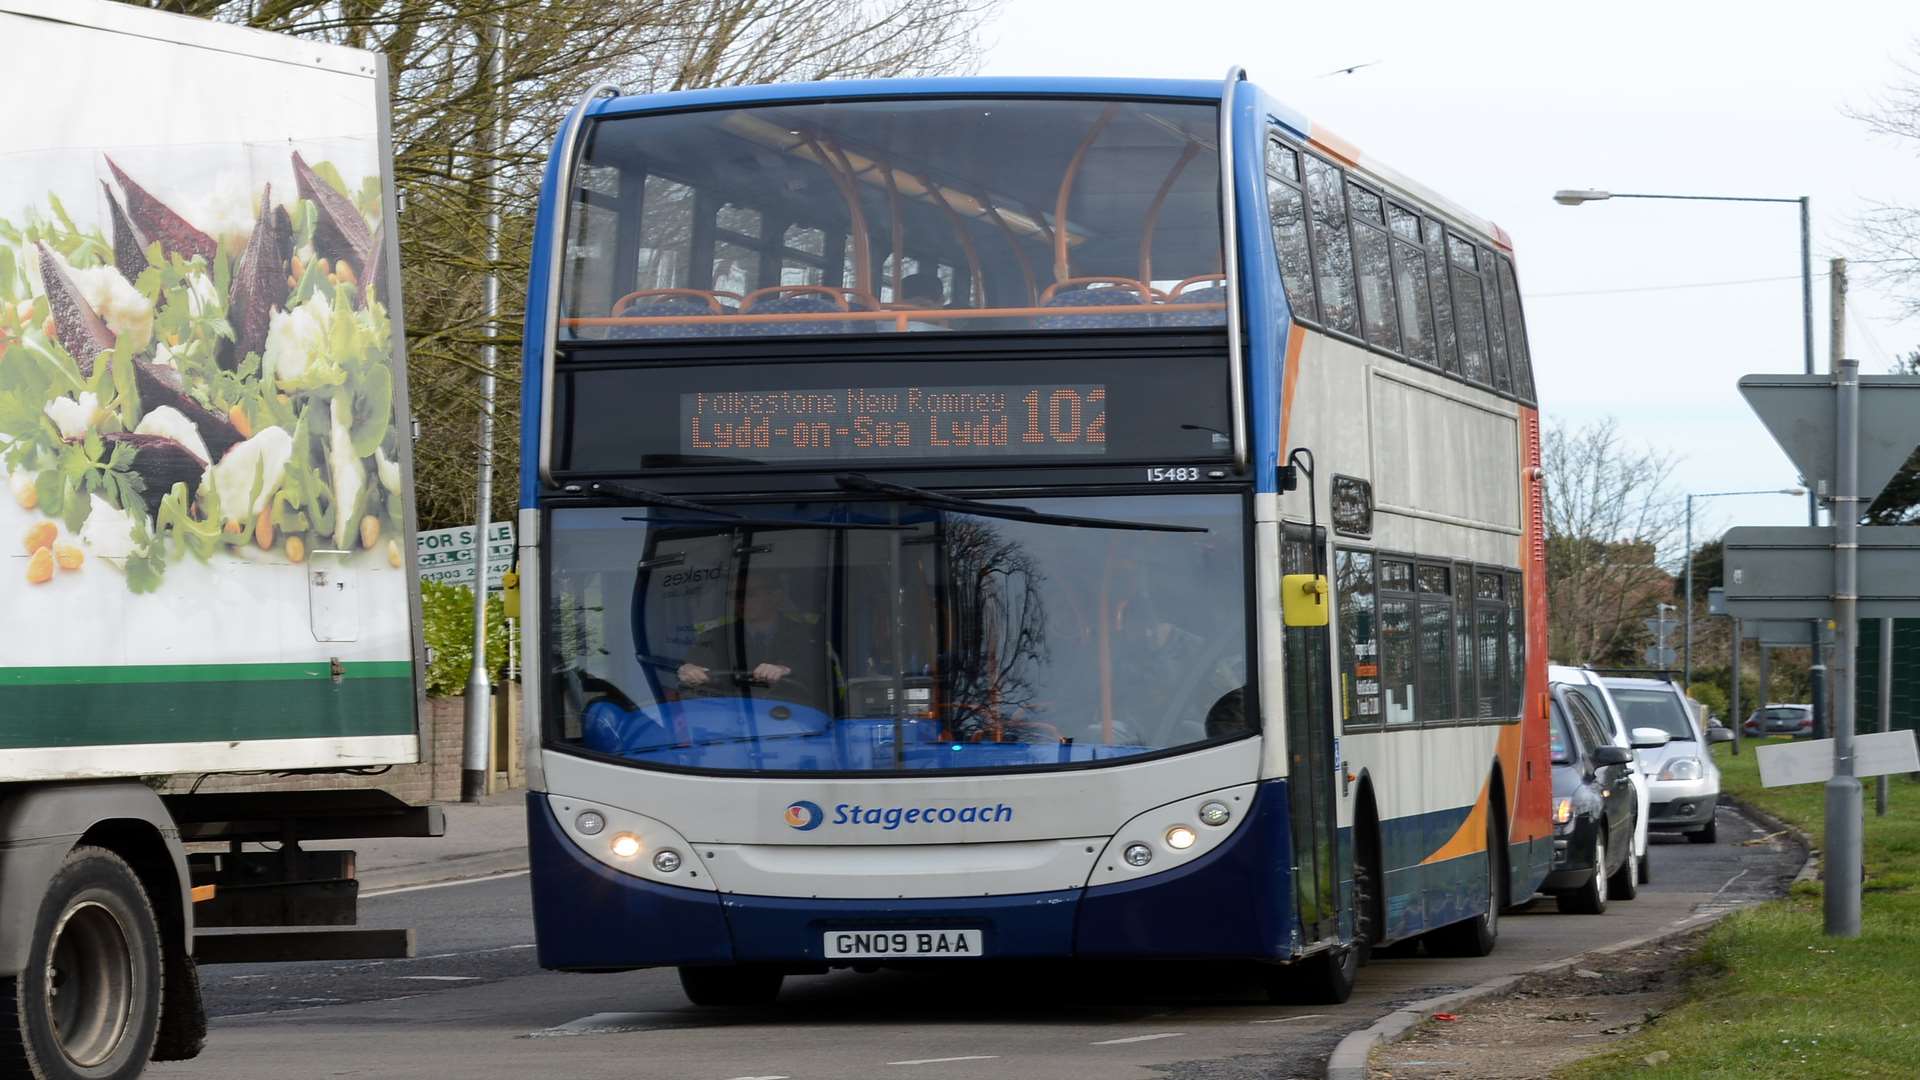 Many bus services in Kent could be under threat